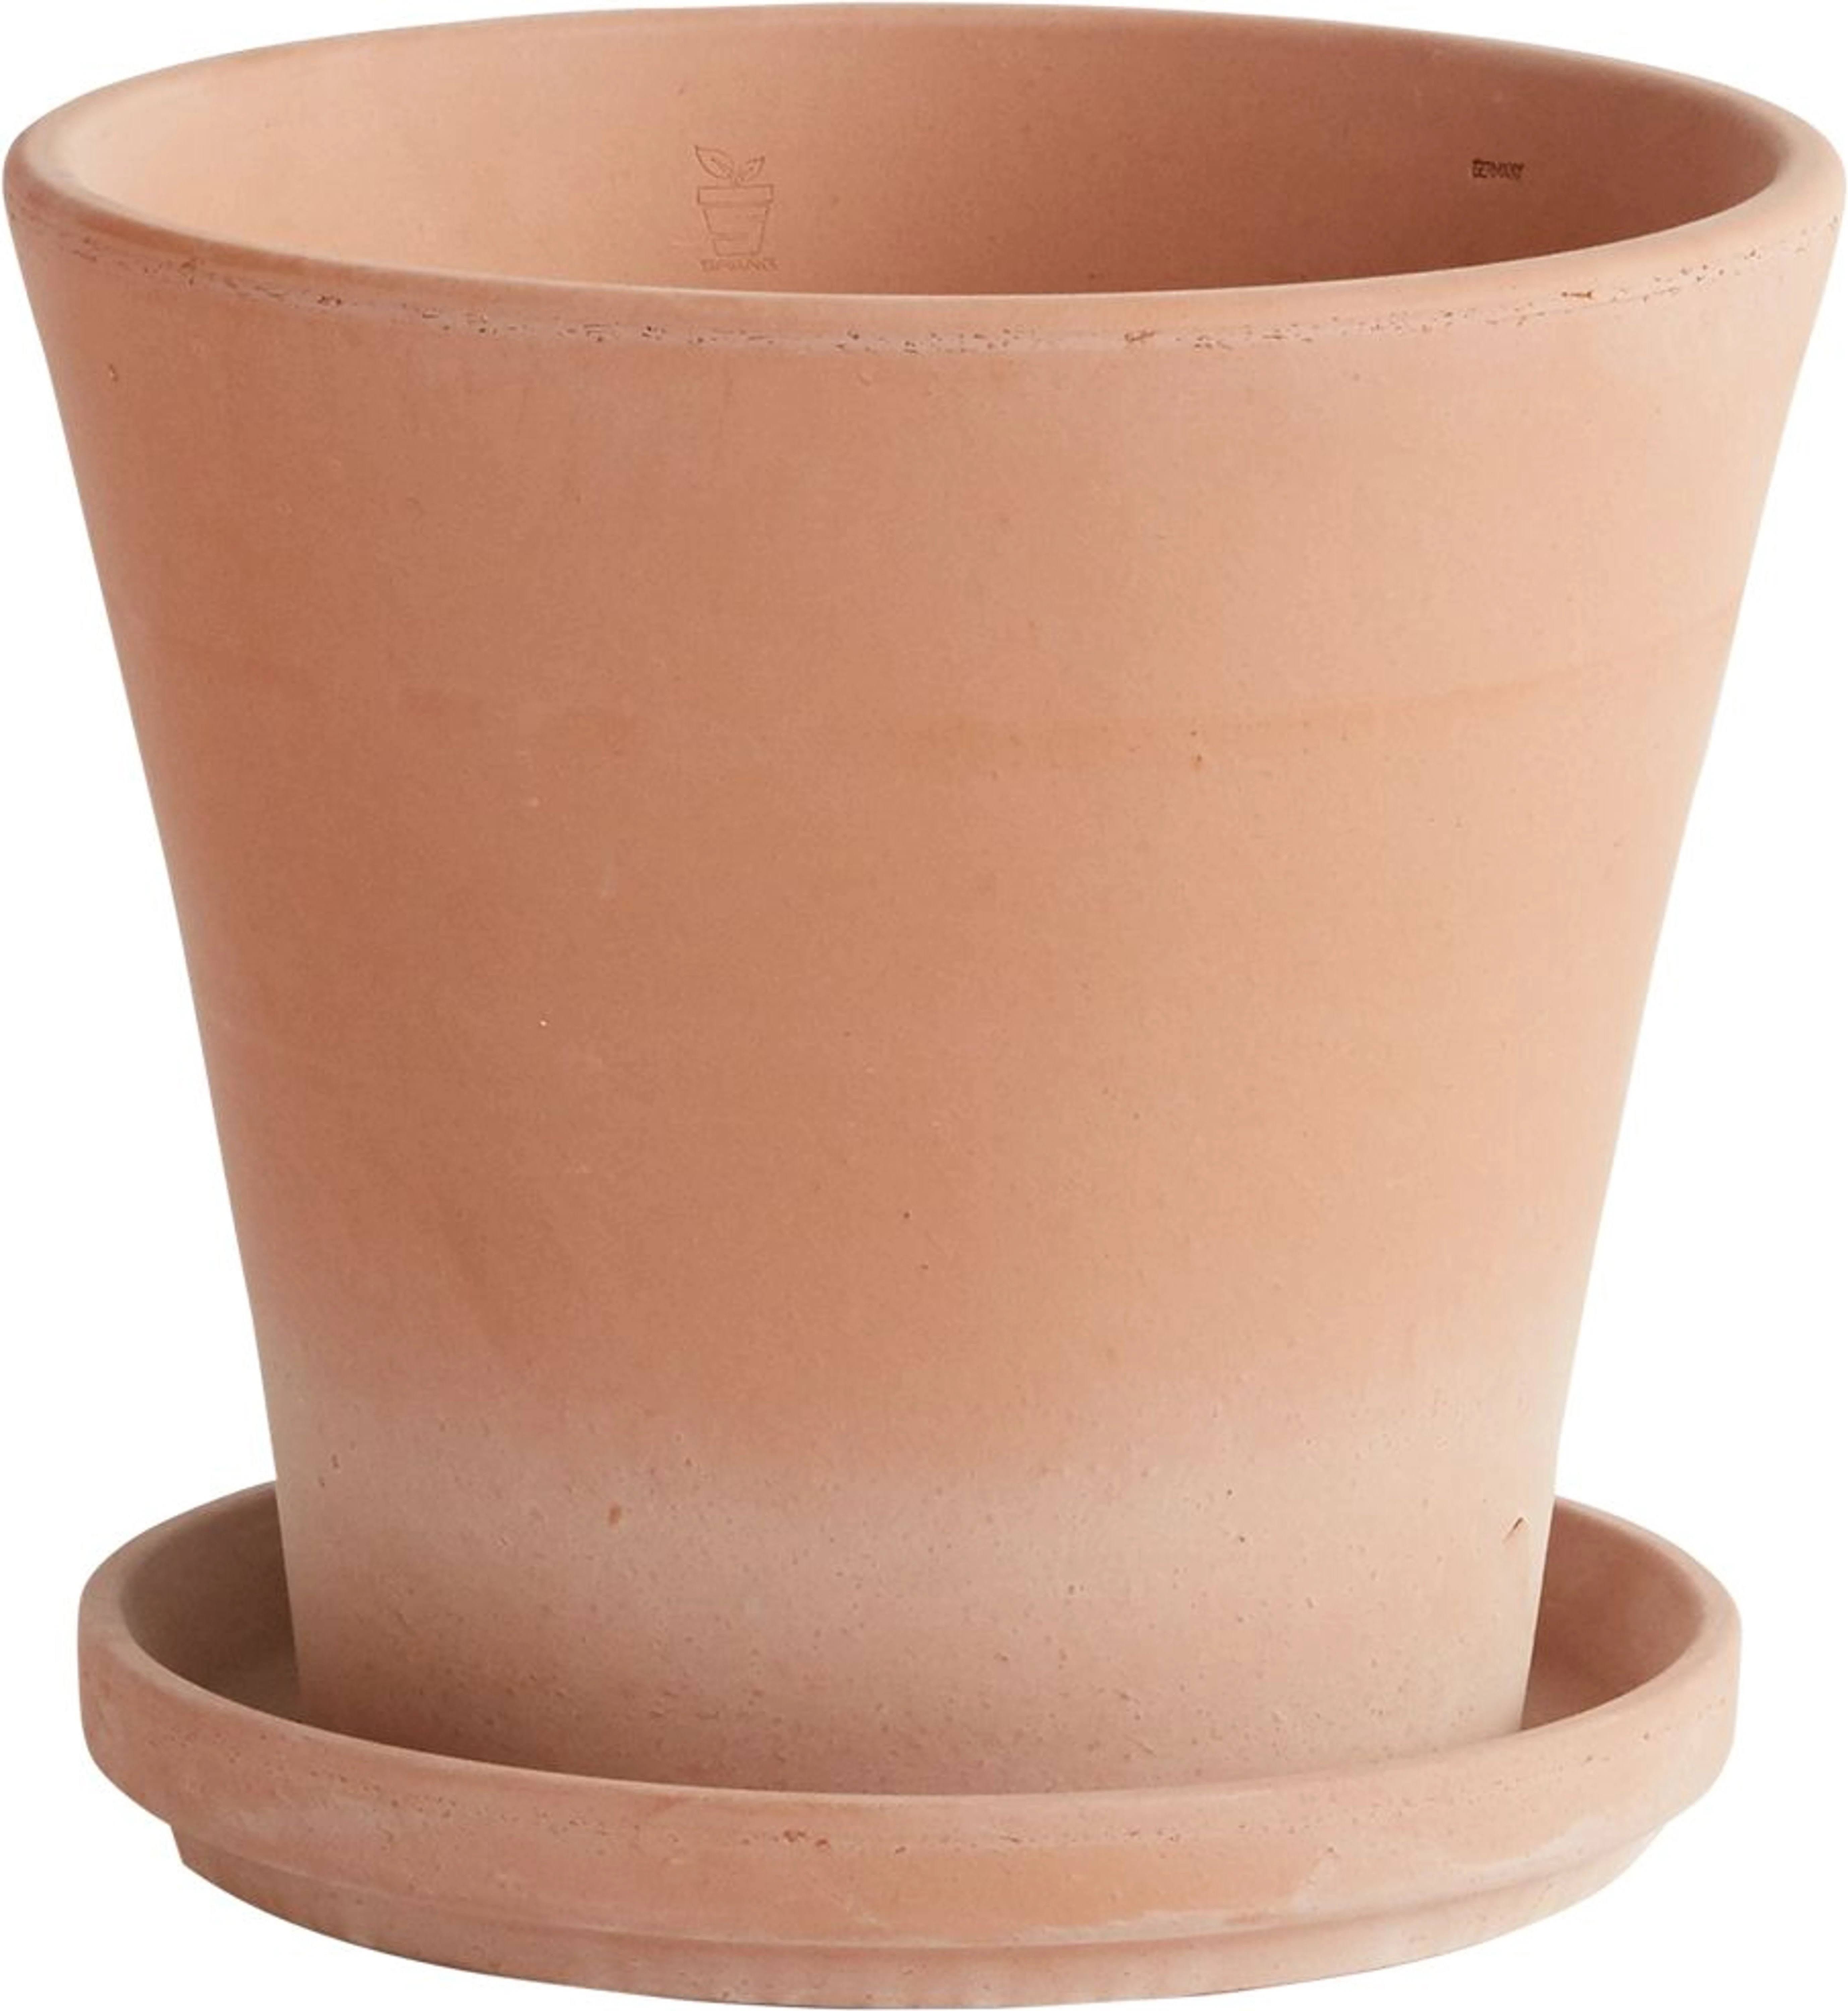 Terra Cotta Clay Pot with Drainage Hole and Saucer (9.5